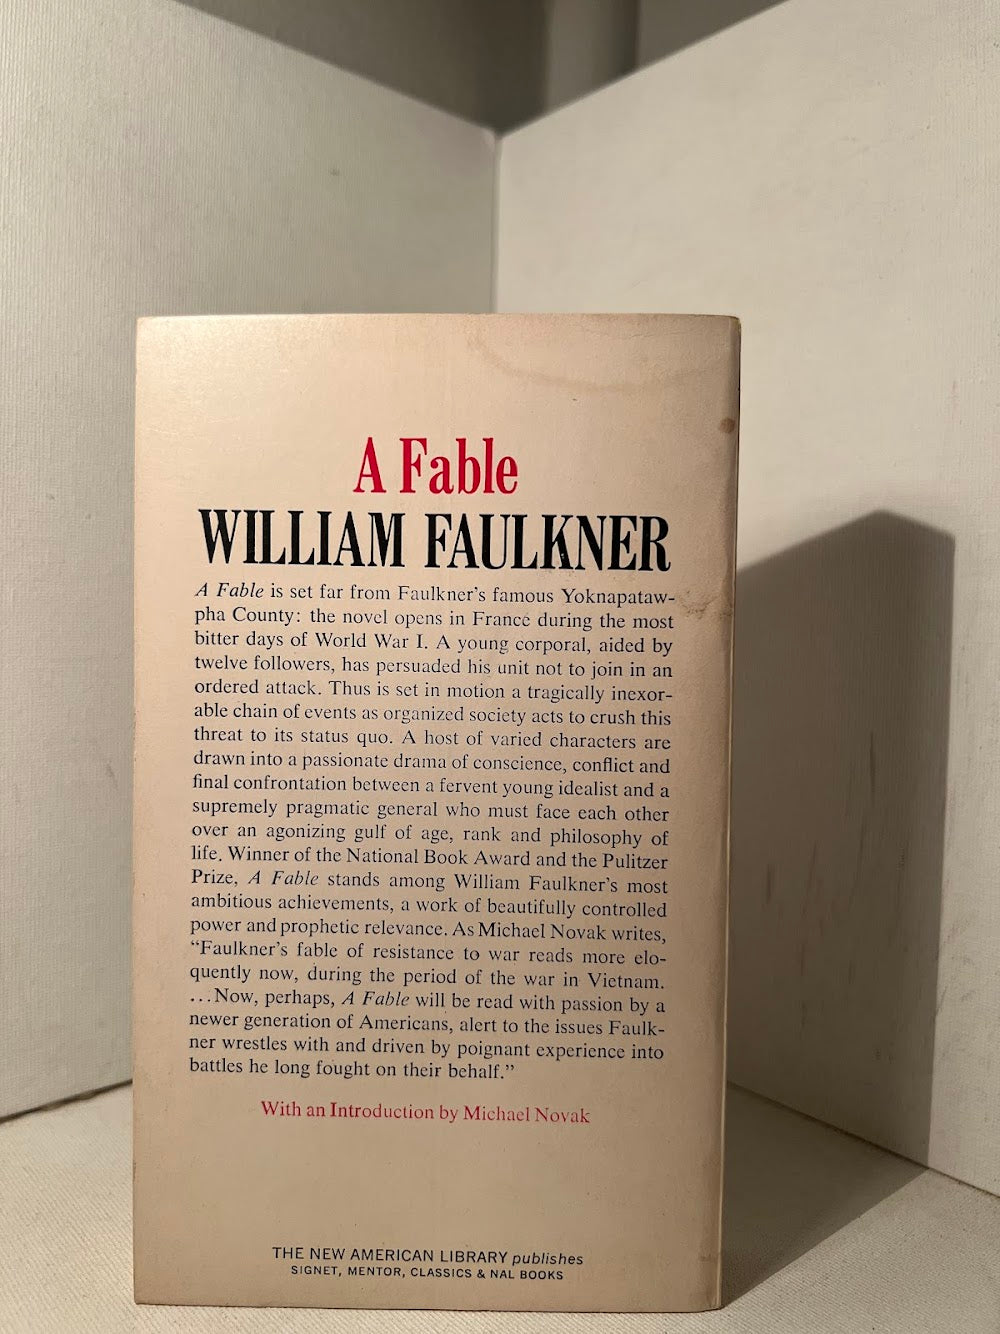 A Fable by William Faulkner